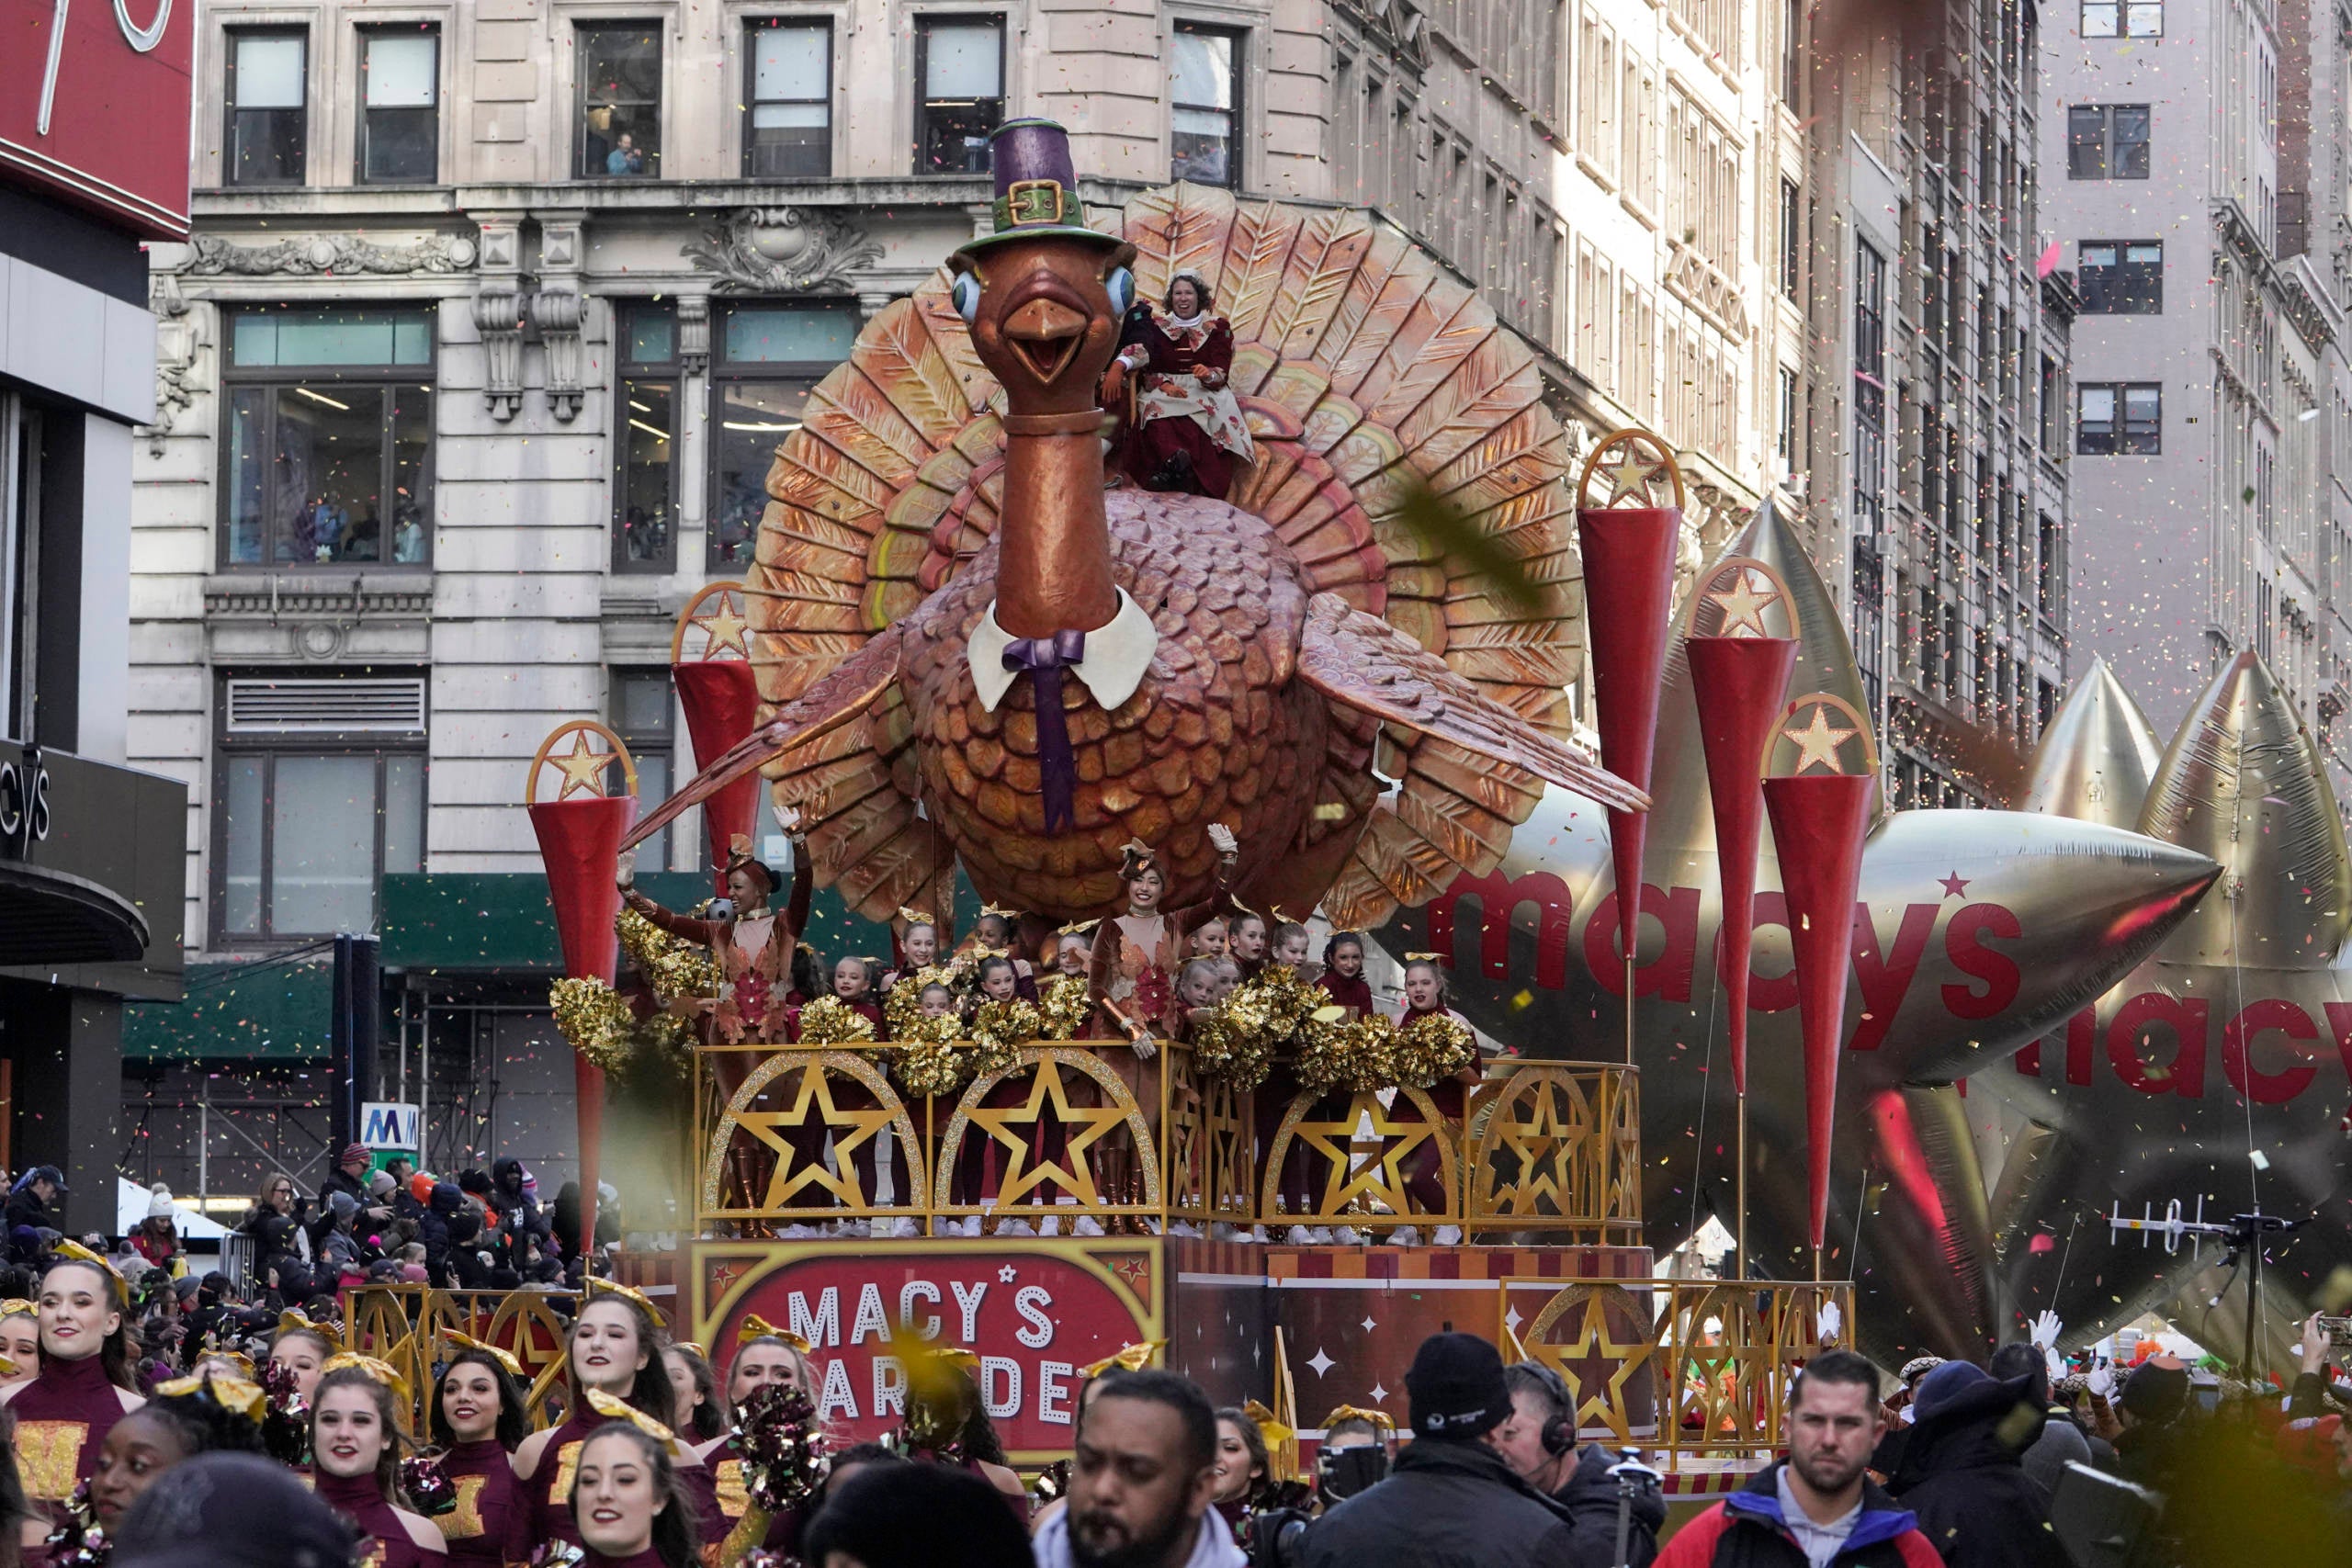 5 Macy's Thanksgiving Day Parade tips for first-time watchers